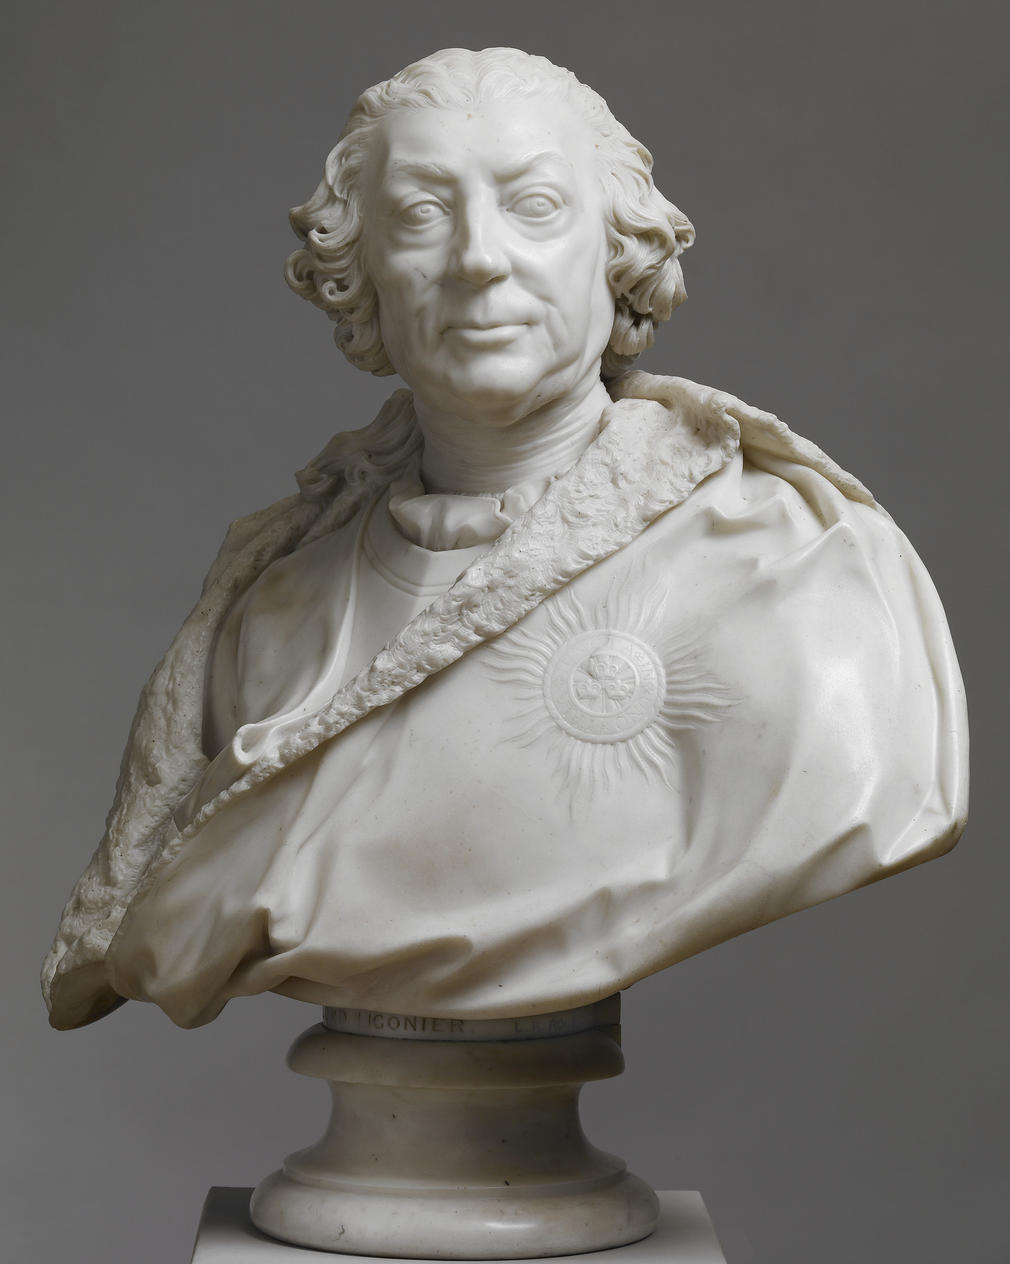 Louis-François Roubiliac, a native of Lyon, learnt his art in Dresden with Balthasar Permoser and in Paris with Nicolas Coustou. Disappointed by his failure to achieve first prize in the Prix de Rome he moved to London in 1730. Though not himself a